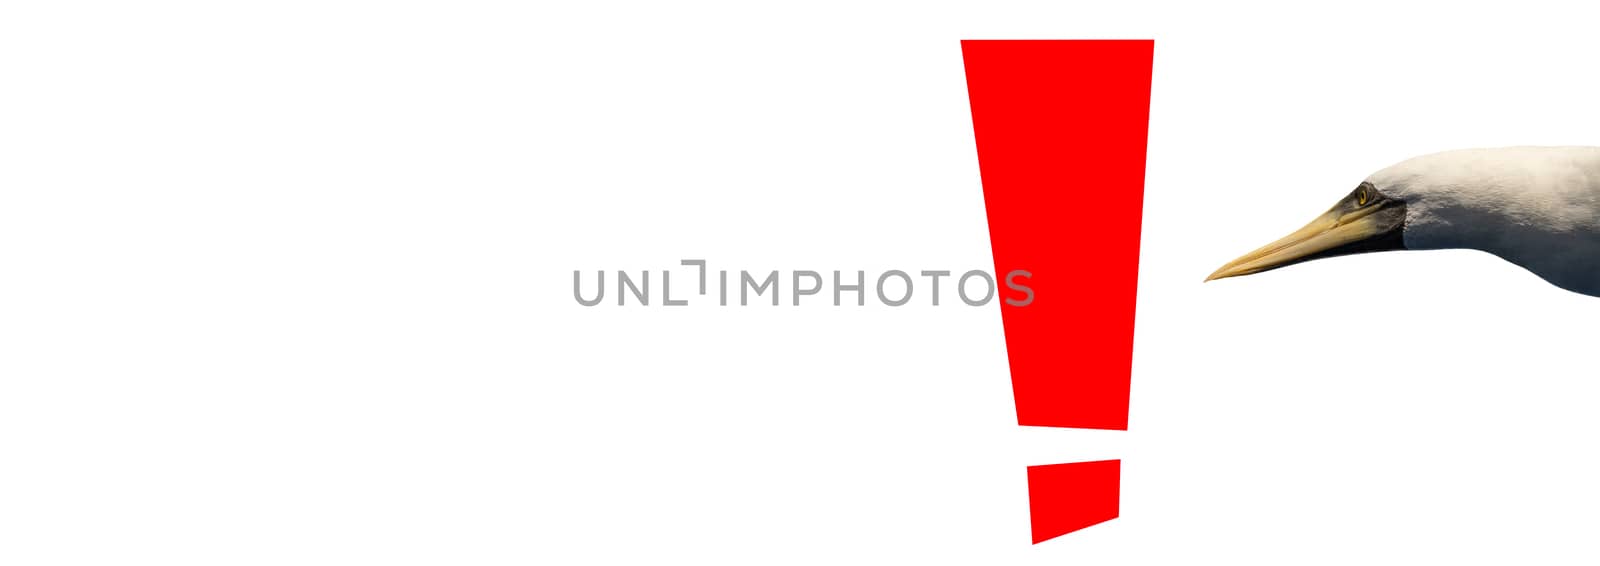 Exclamation mark in red color on white background with a bird looking at it. Isolated. Blank space on the left part of the image.